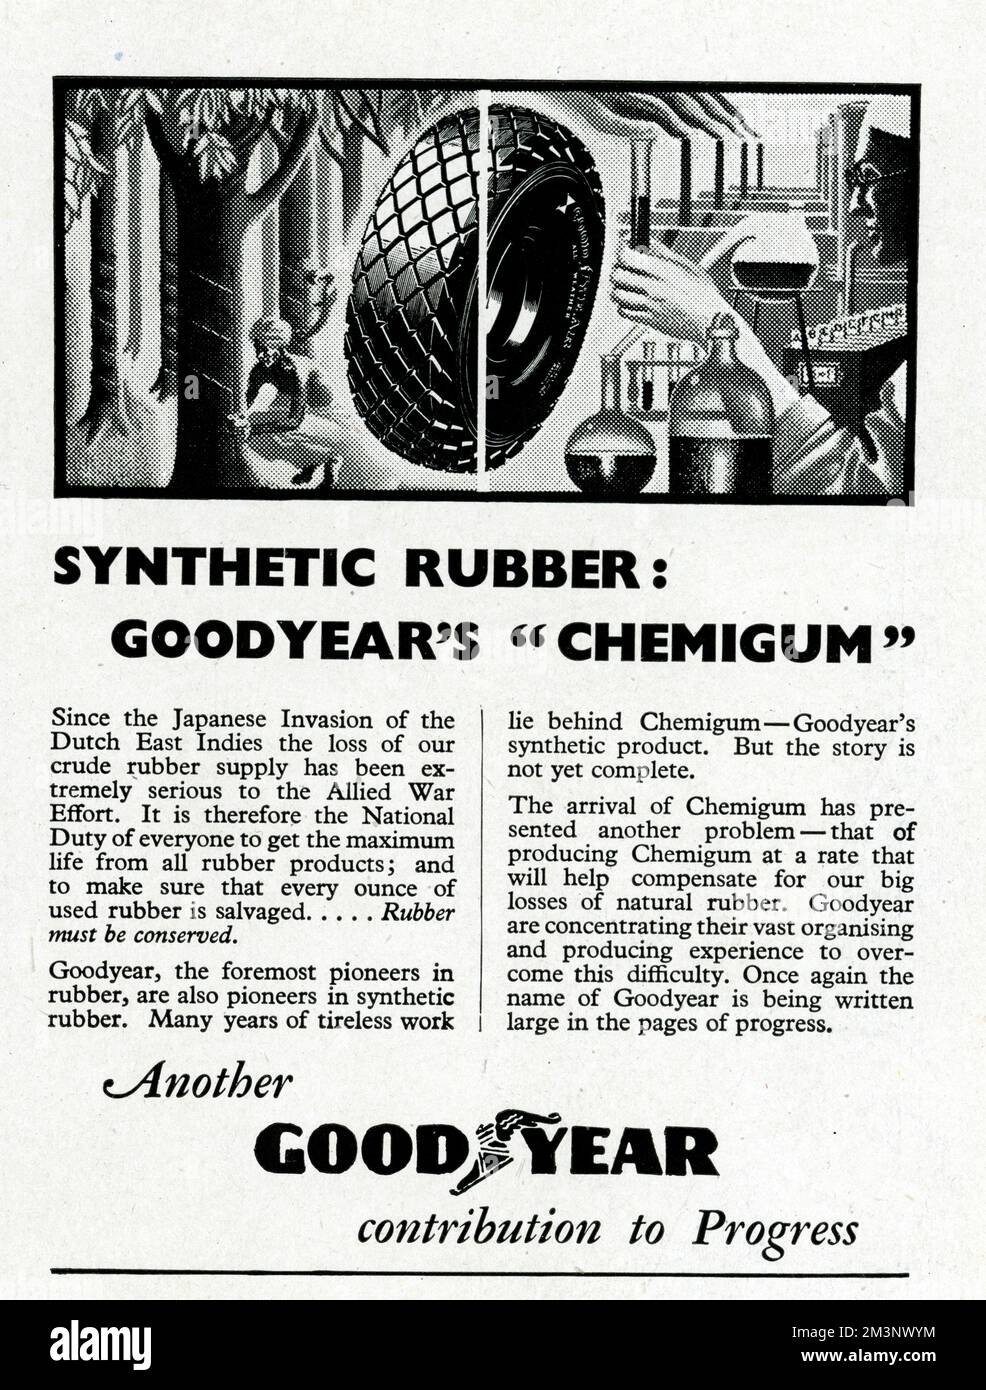 'Another Goodyear contribution to progress'.  Since the Japanese Invasion of the Dutch East Indies the loss of our crude rubber supply has been extremely serious to the Allied War Effort. It is therefore the National Duty of everyone to get the maximum life from all rubber products; and to make sure that every ounce of used rubber is salvaged . . . . . Rubber must be conserved.  Goodyear, the foremost pioneers in rubber, are also pioneers in synthetic rubber.  Many years of tireless work lie behind Chemigum - Goodyear's synthetic product.  But the story is not yet complete.  1942 Stock Photo